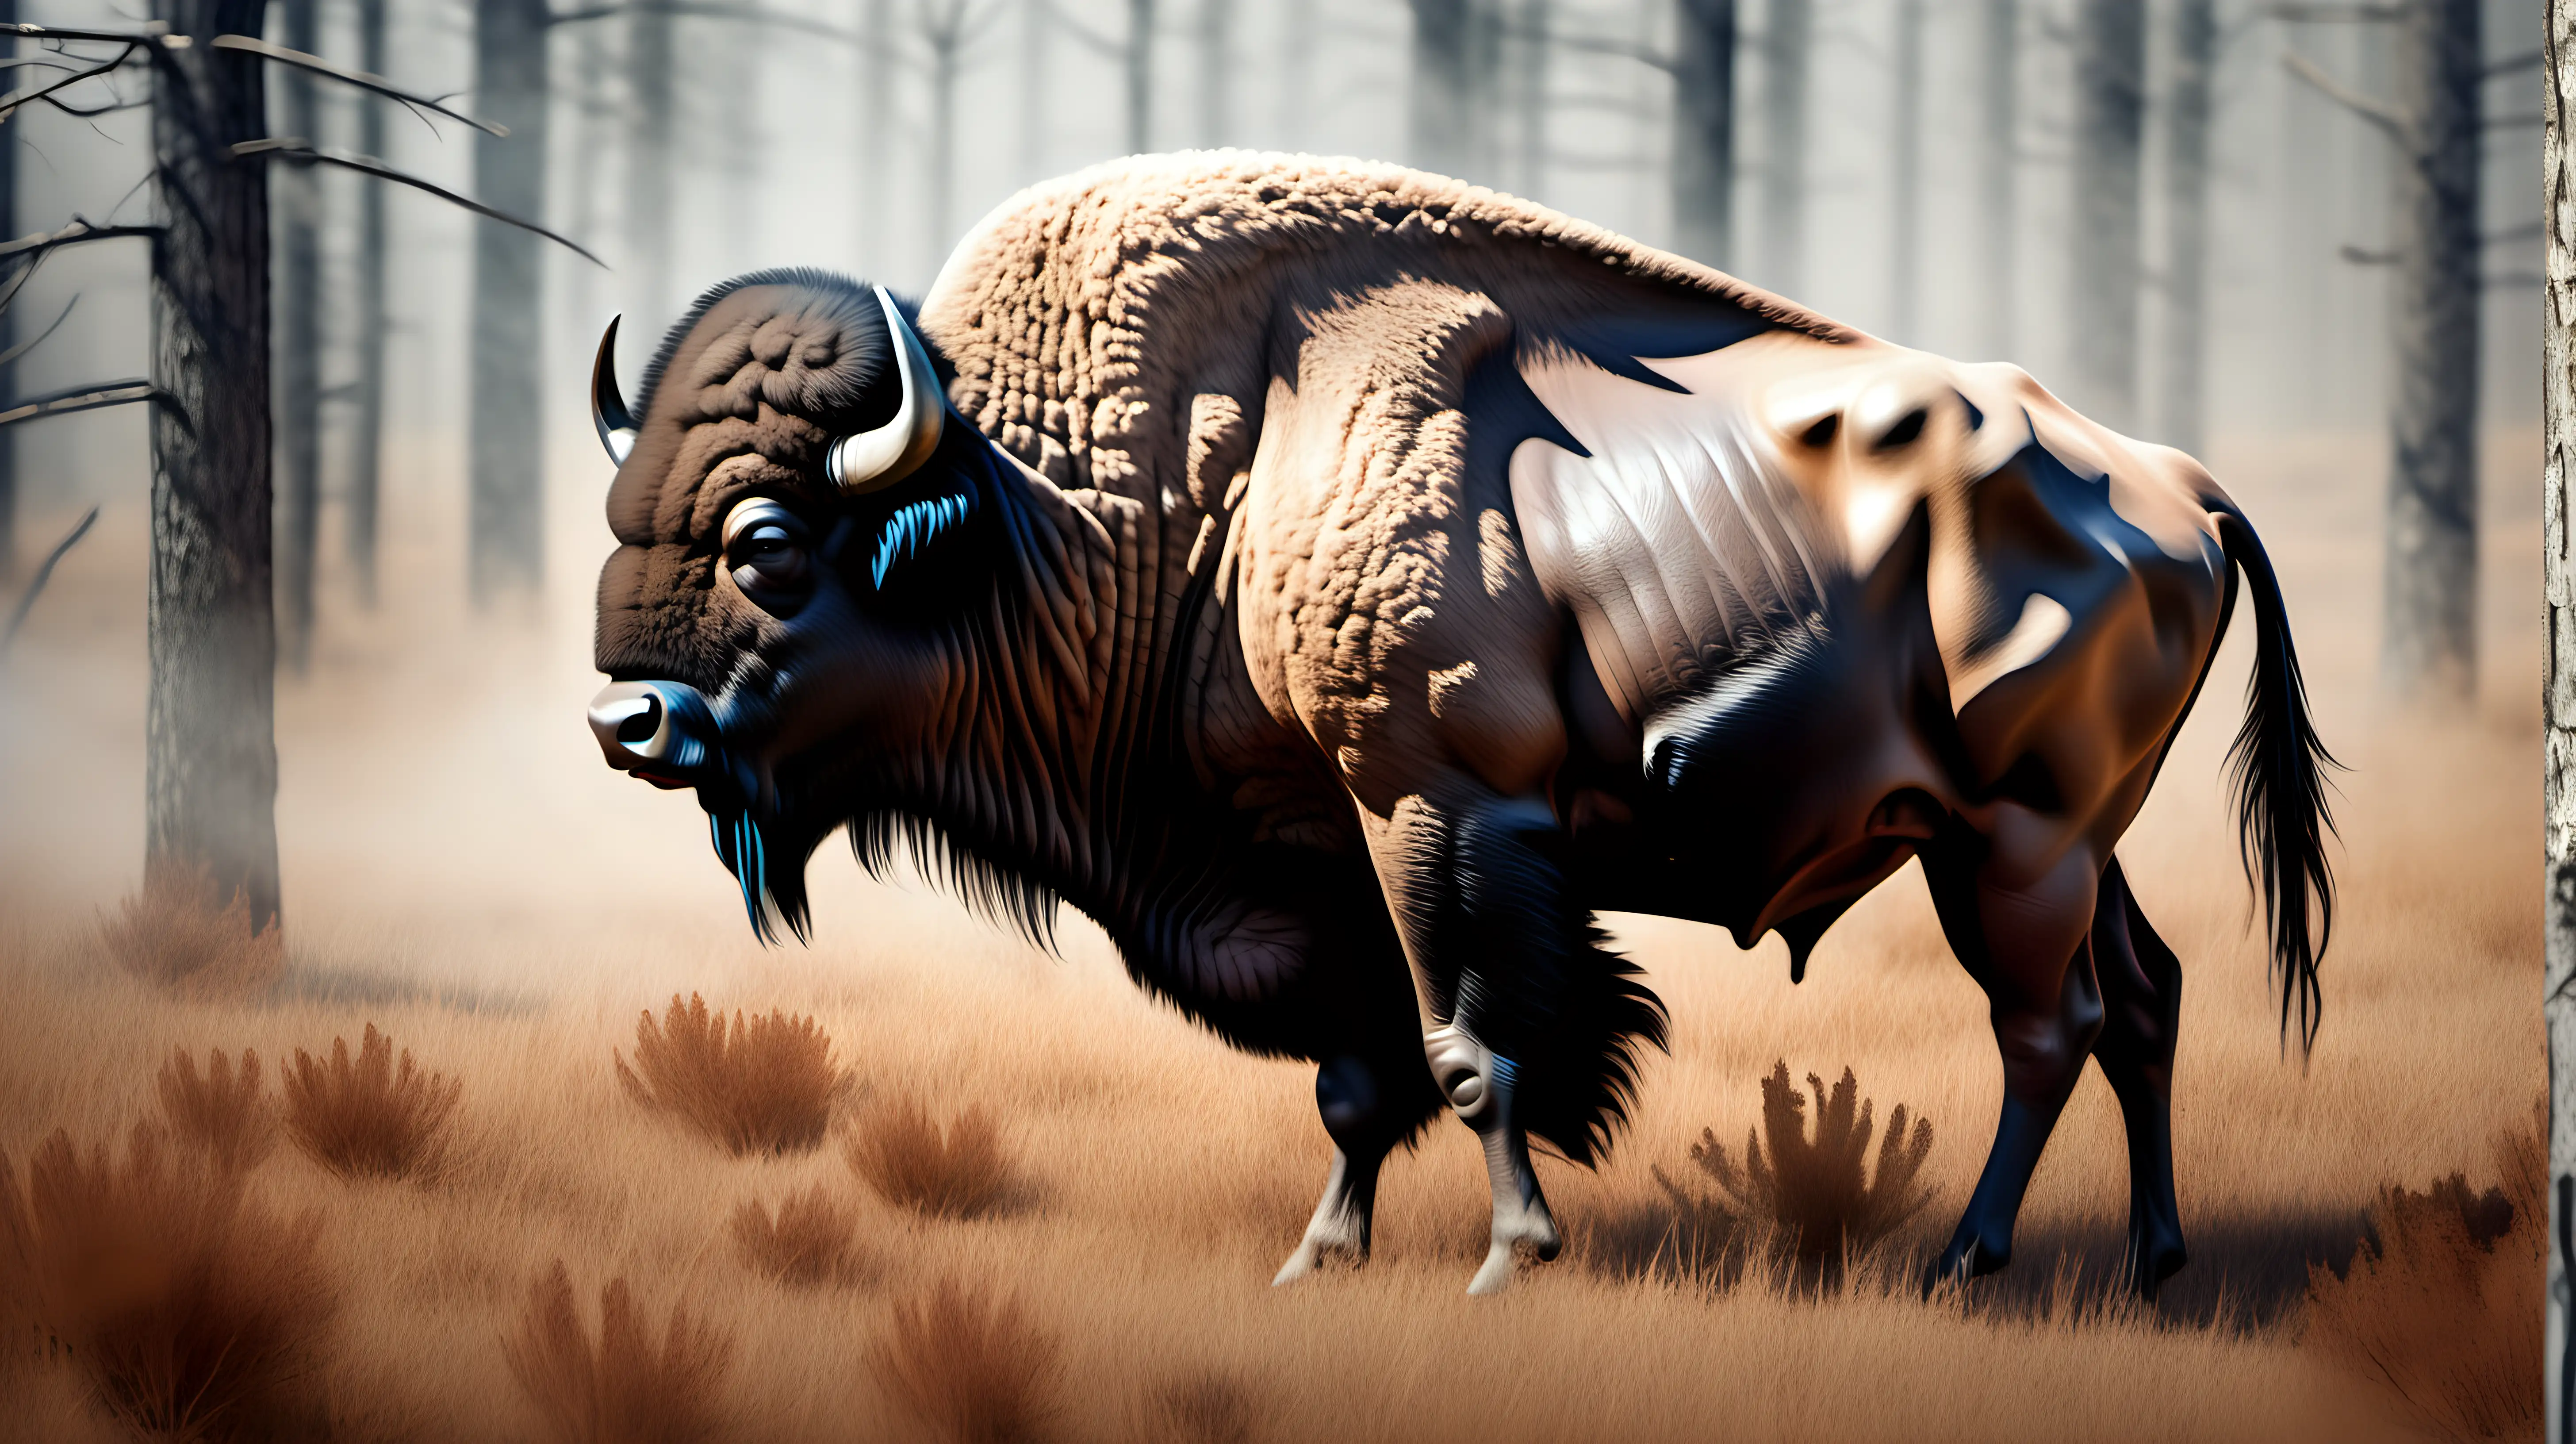 generate an image with the iconic american buffalo in its natural habitat with native american elements